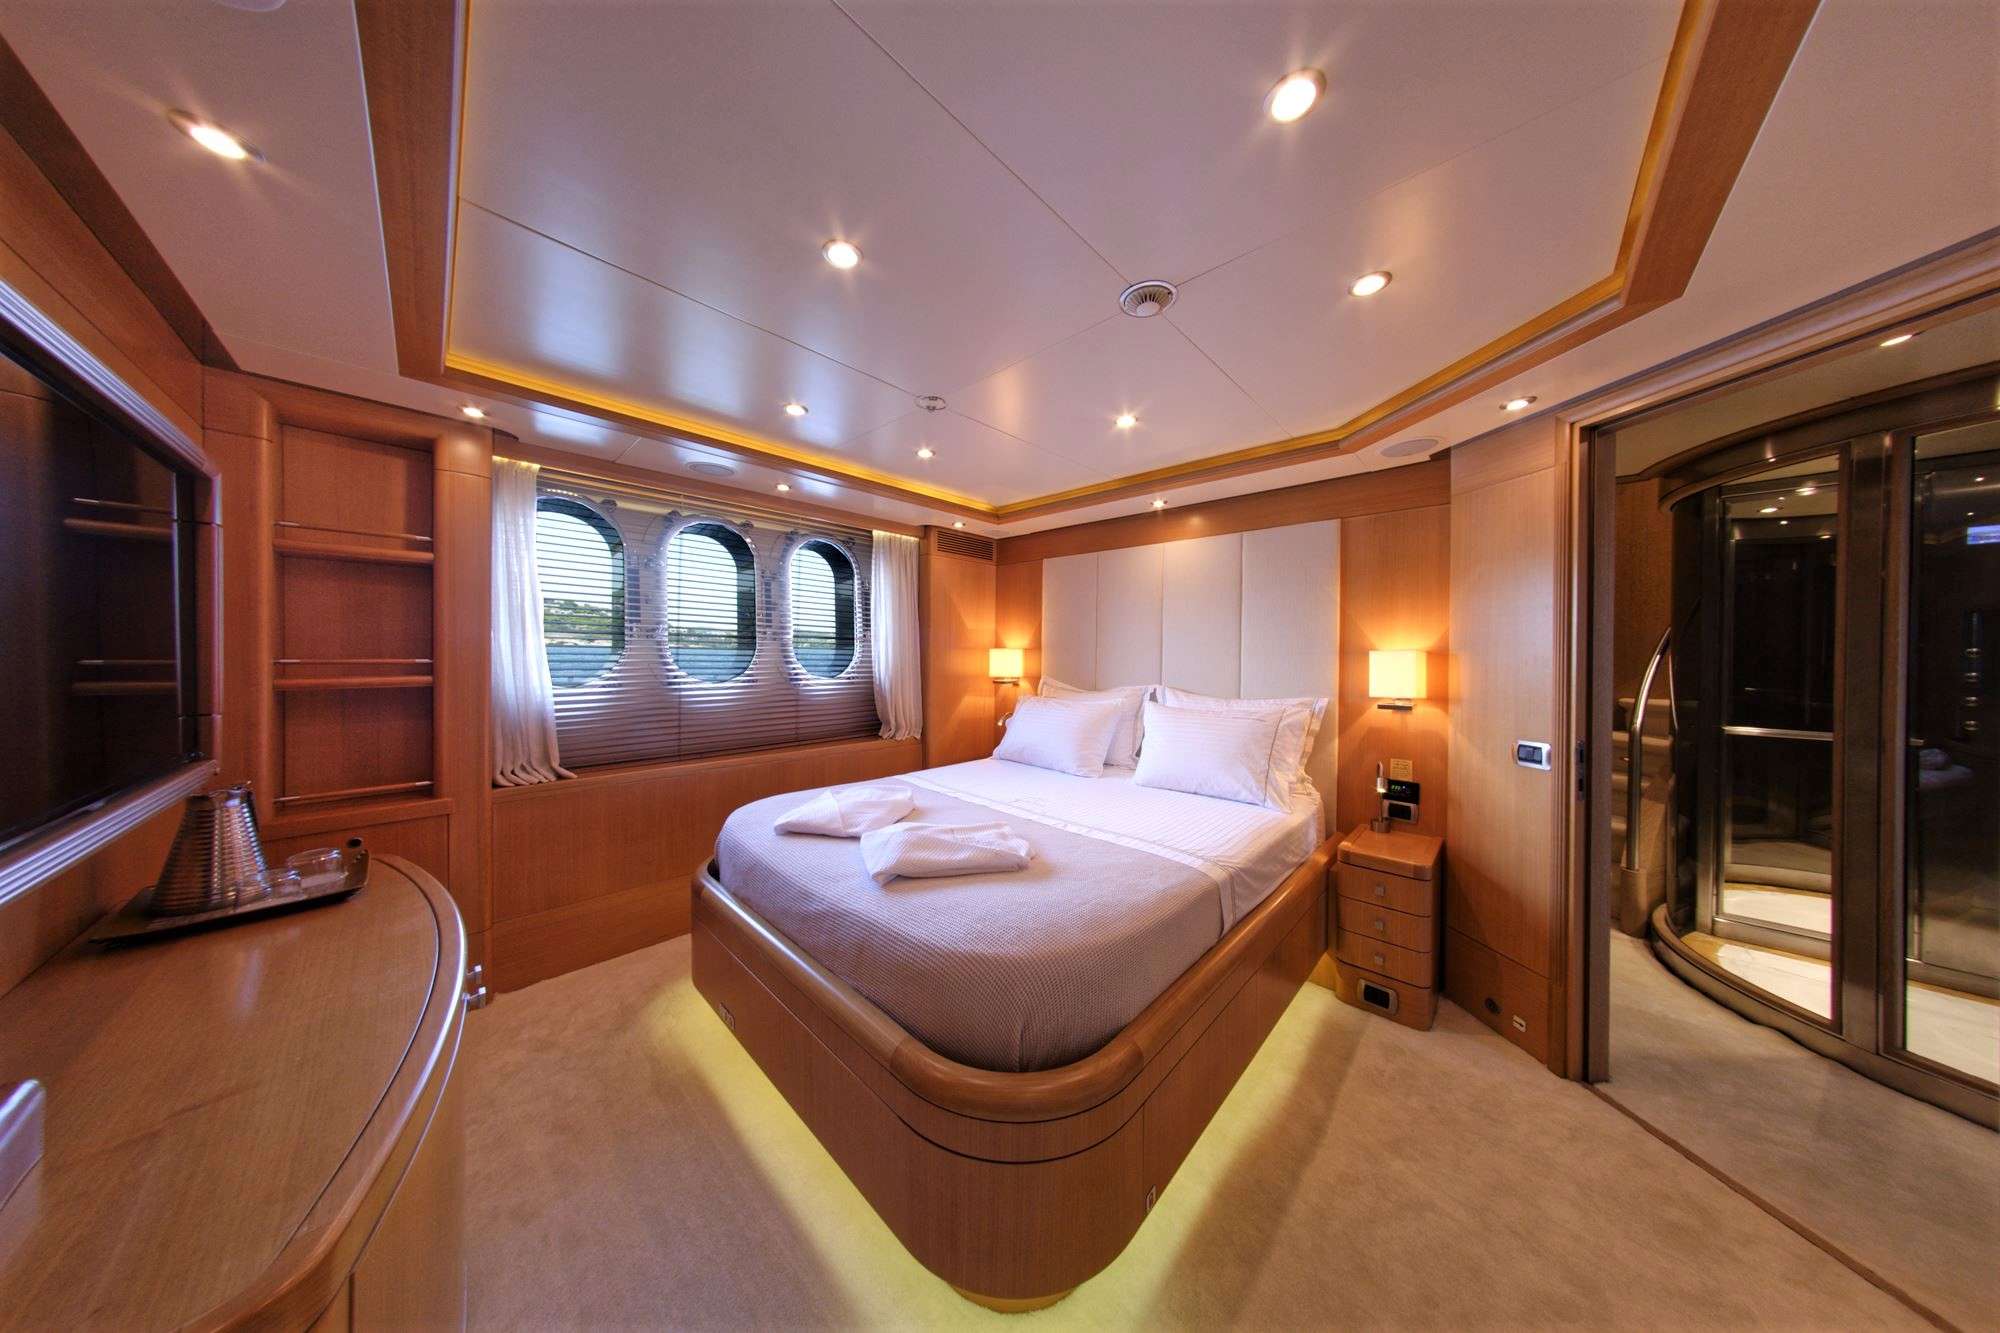 GRANDE AMORE Yacht Charter - One of the 2 almost identical Double cabins on Lower Deck